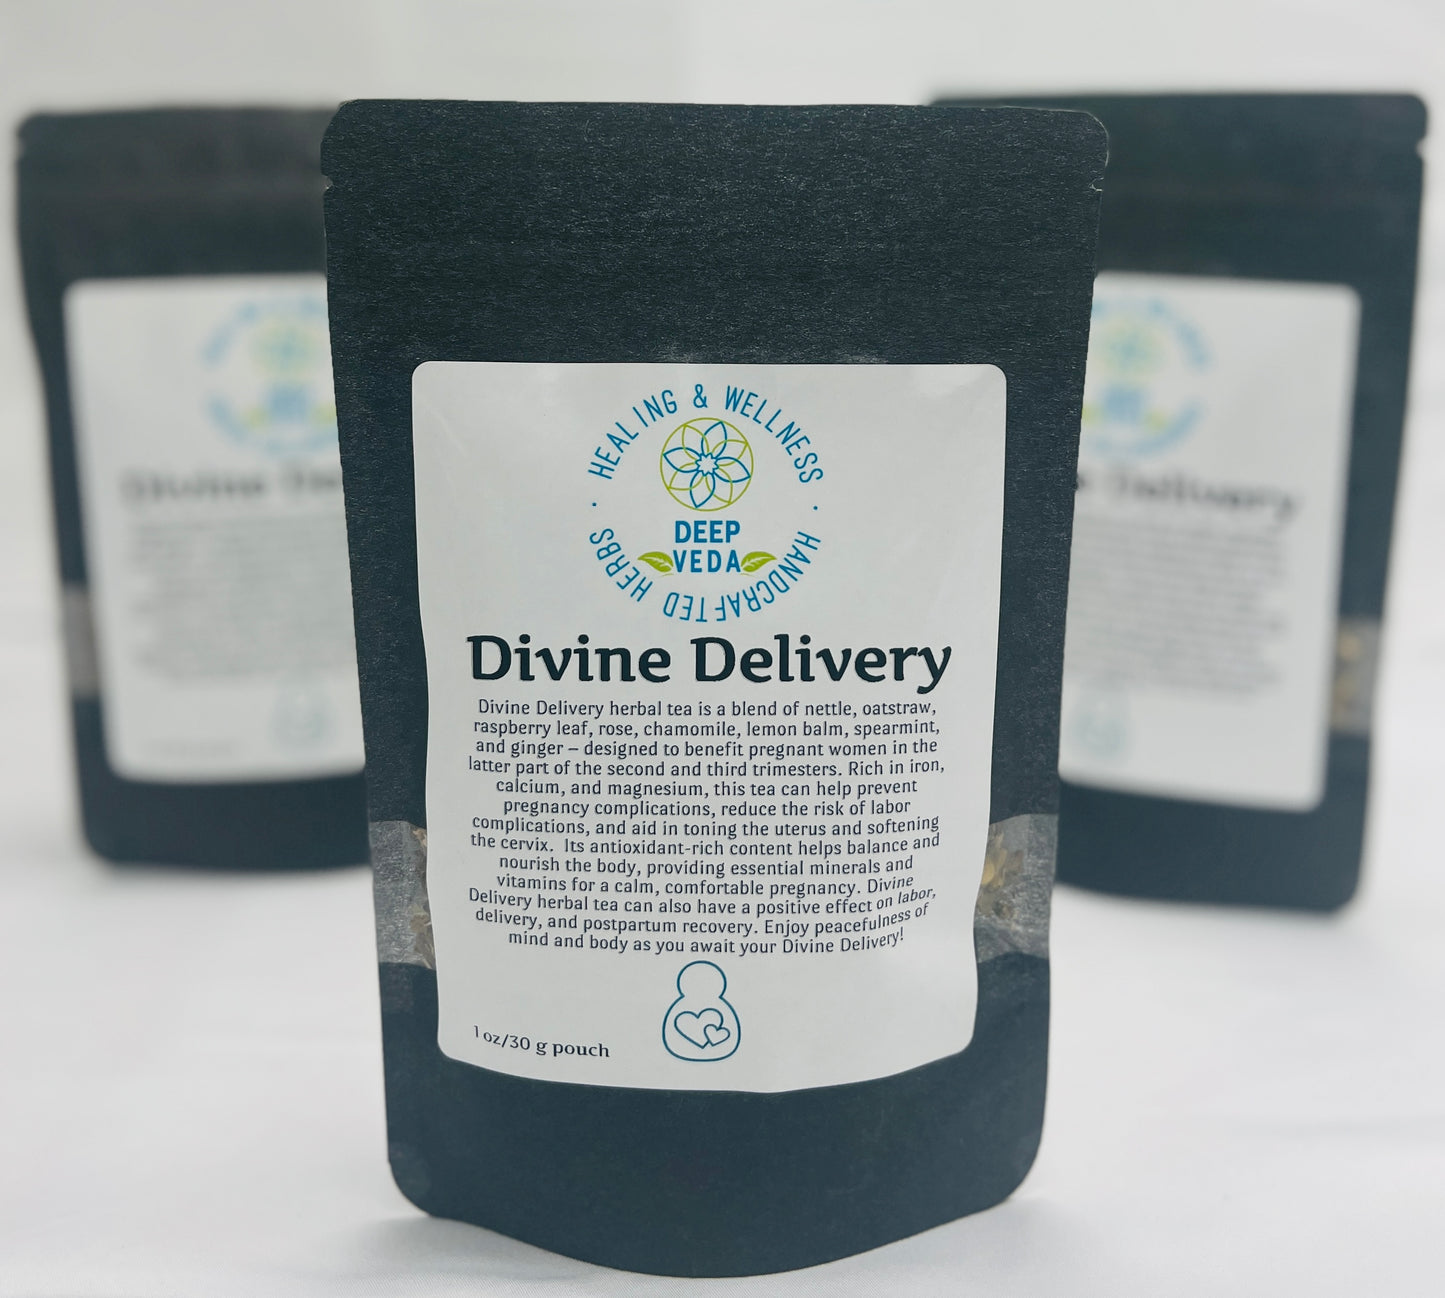 Divine Delivery - herbal tea designed supplies a wealth of health benefits towards the end of pregnancy